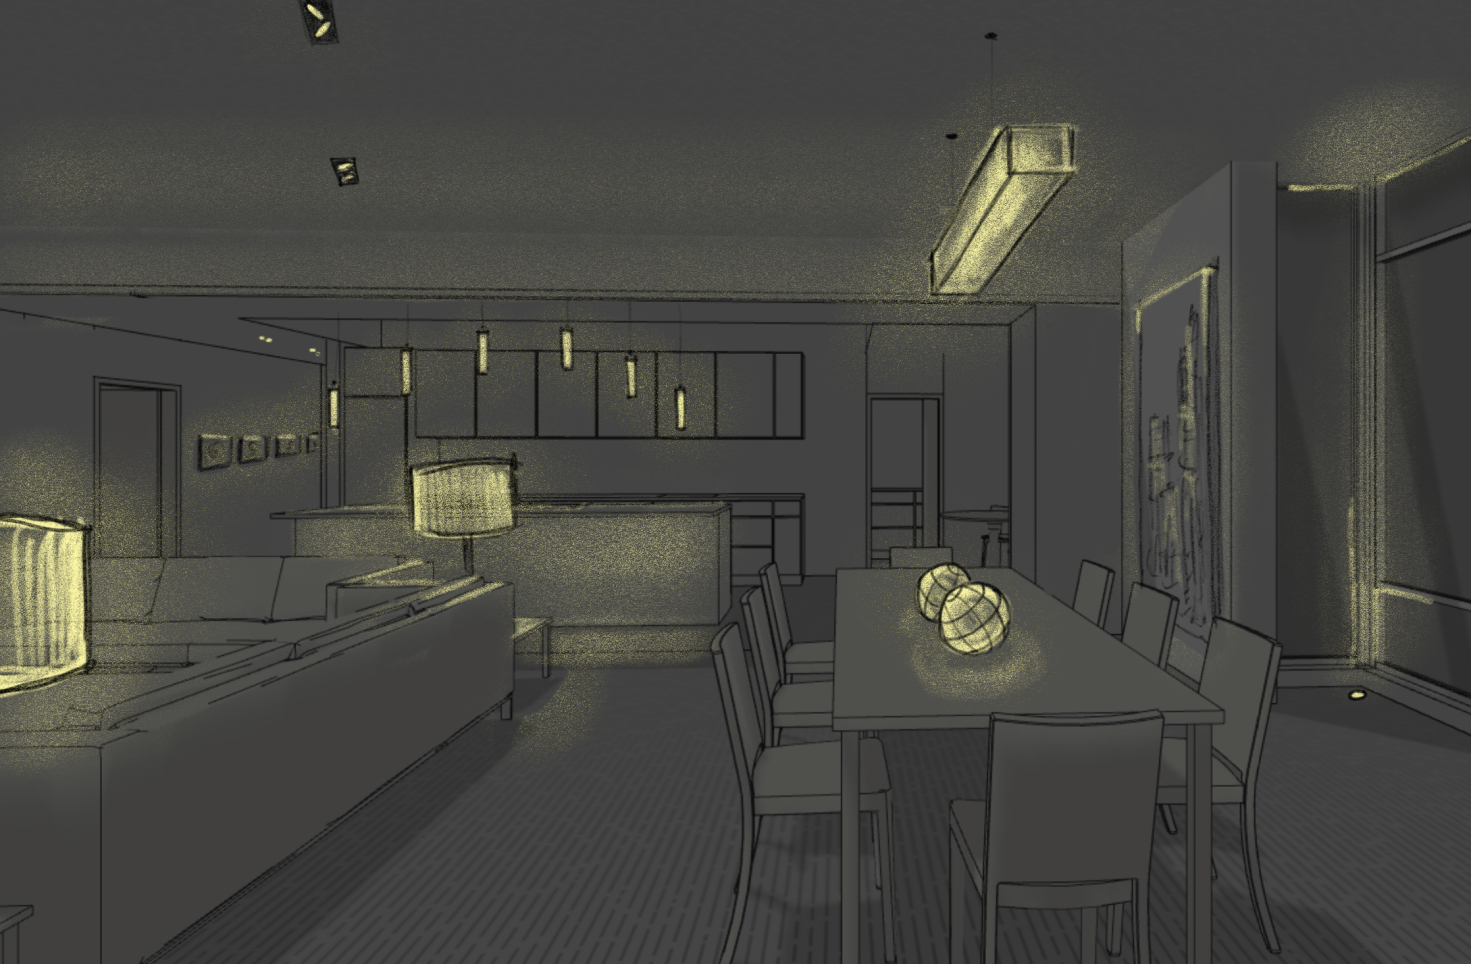 A digital sketch of a living room and dining area with focus on adding soft lighting elements